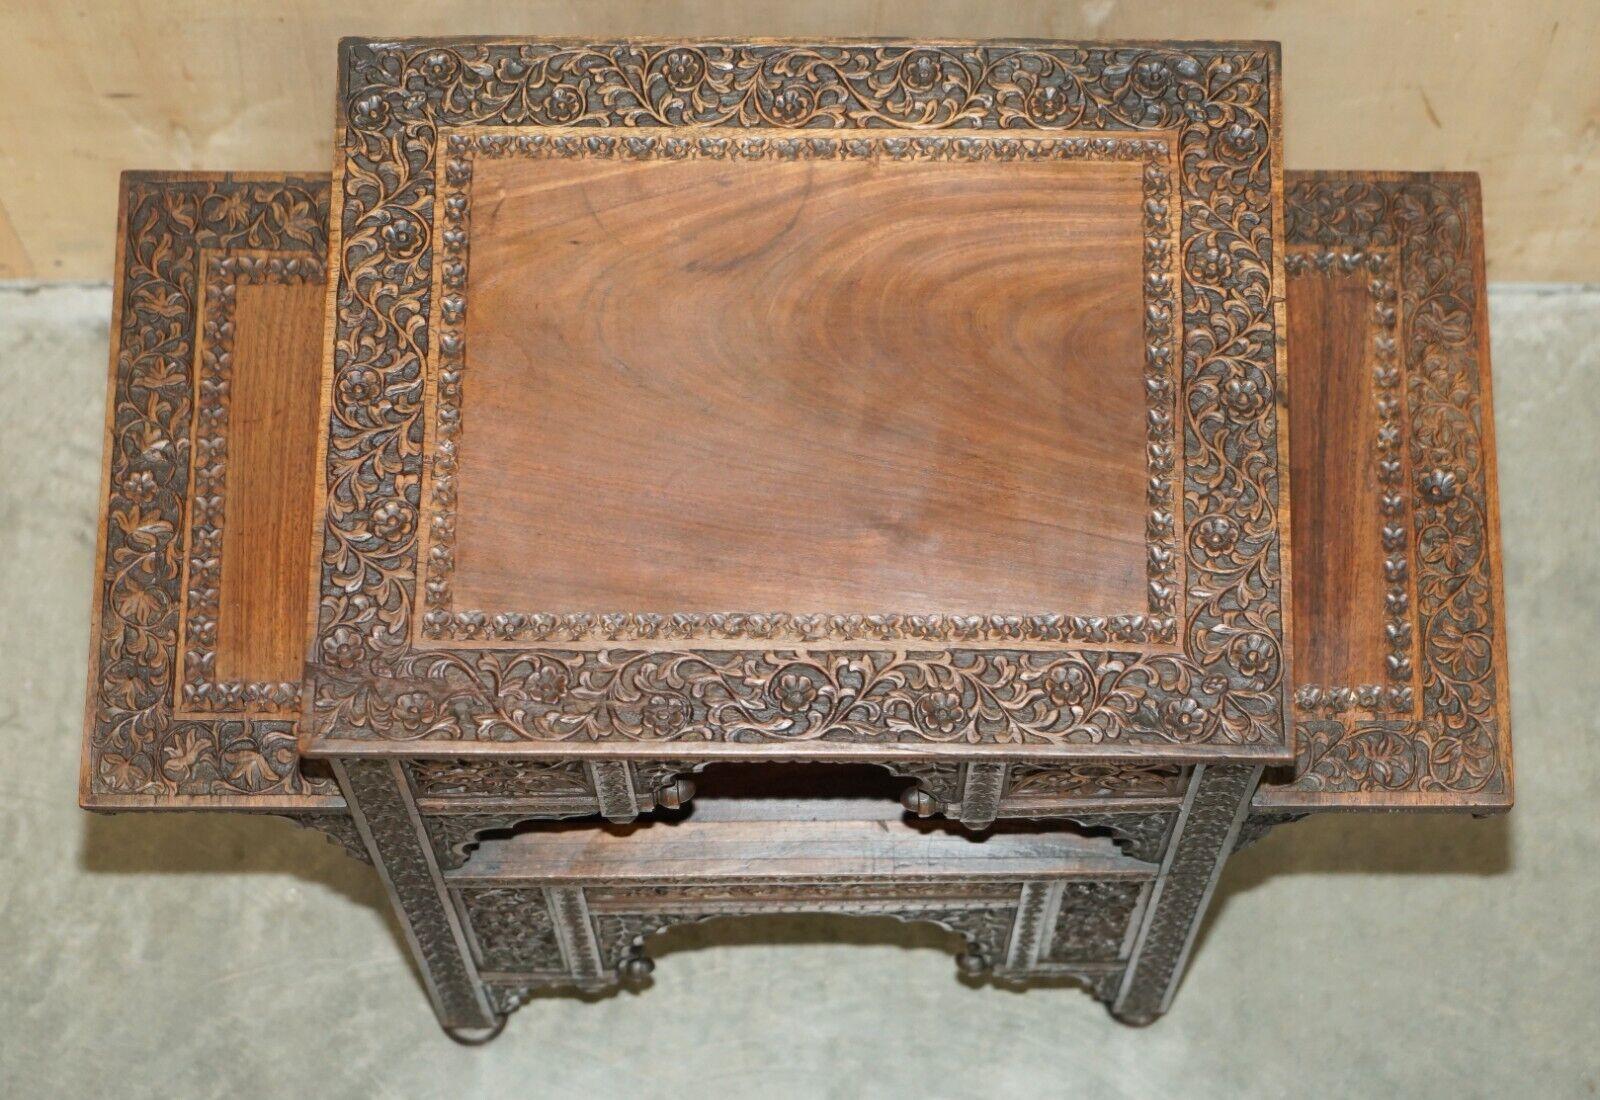 FINE LARGE ANTIQUE HAND CARved LiBERTY LONDON MOORISH OCCASIONAL CENTRE TABLE im Angebot 10